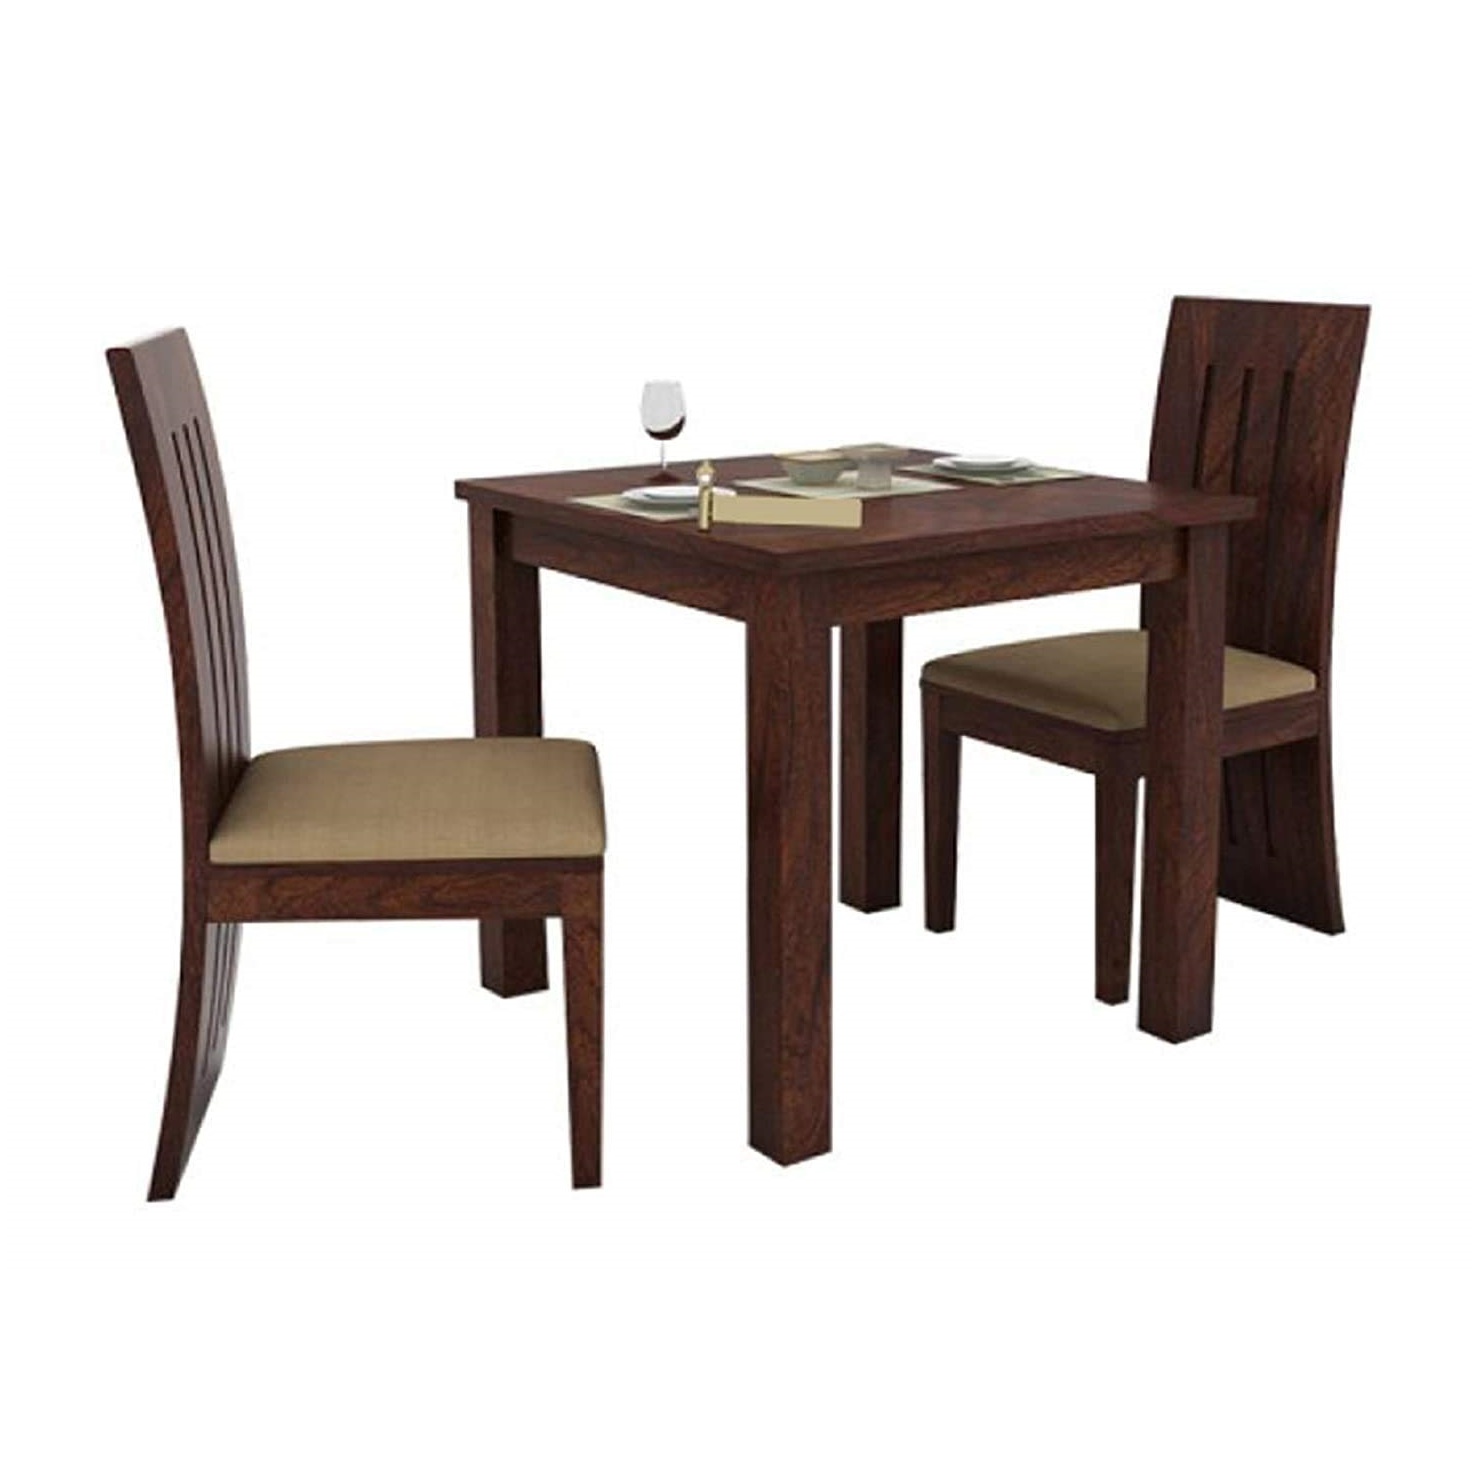 Sheesham Wood 2 Seater Dining Table Set for Home Living in Walnut Finish